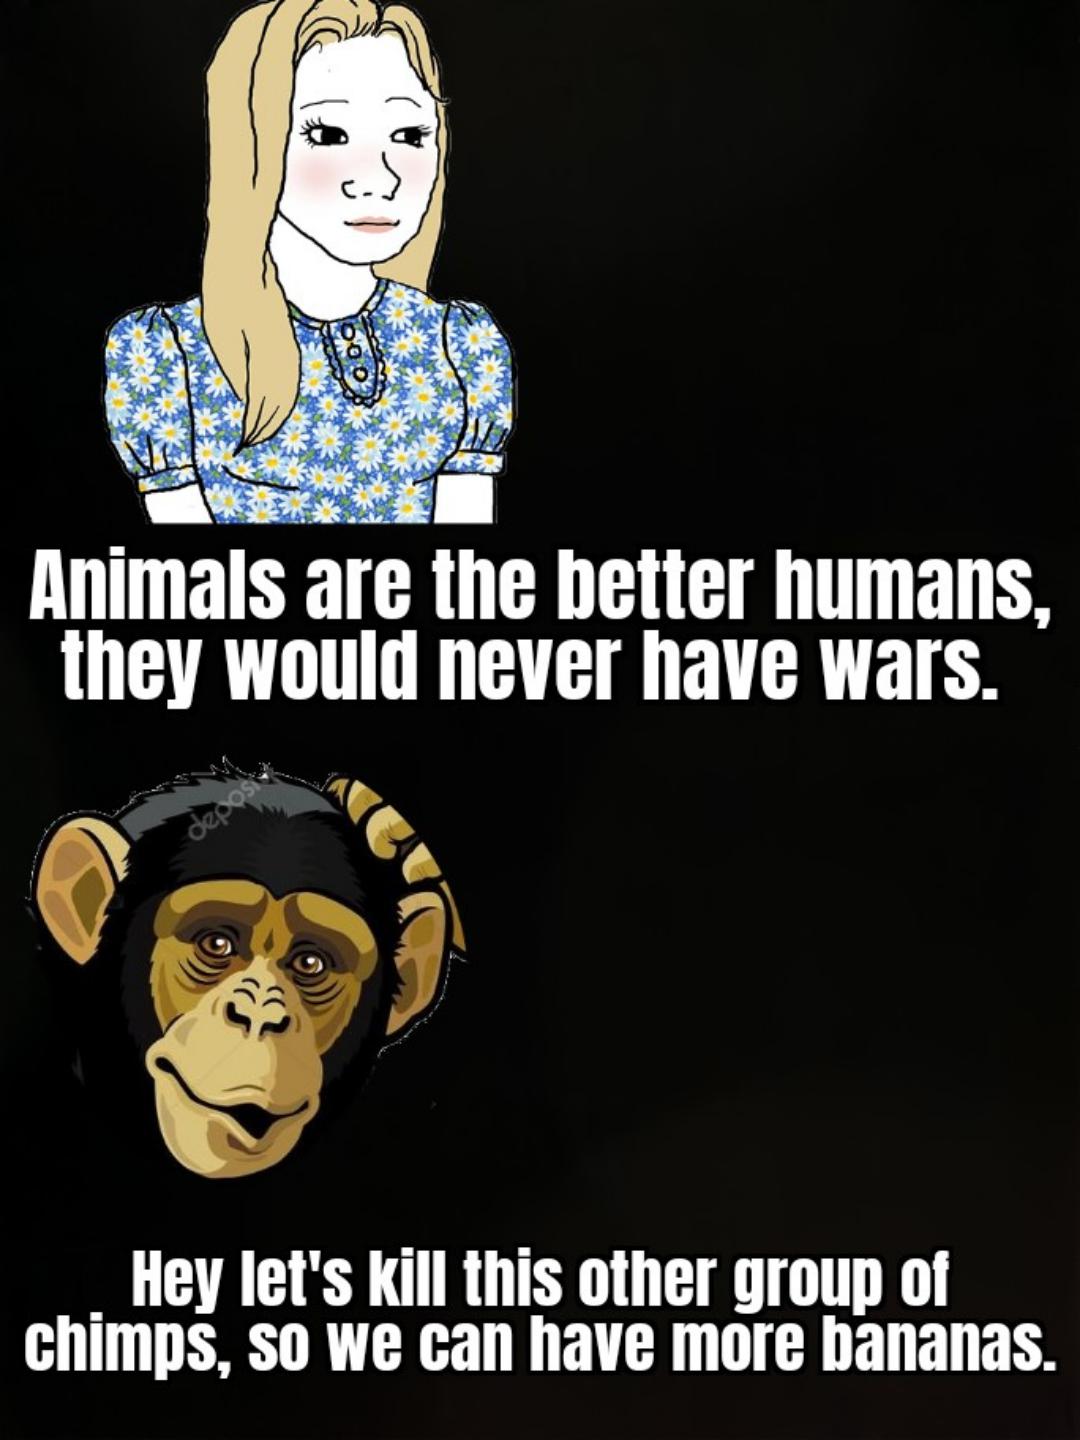 dank memes - funny memes - cartoon - Animals are the better humans, they would never have wars. Hey let's kill this other group of chimps, so we can have more bananas.